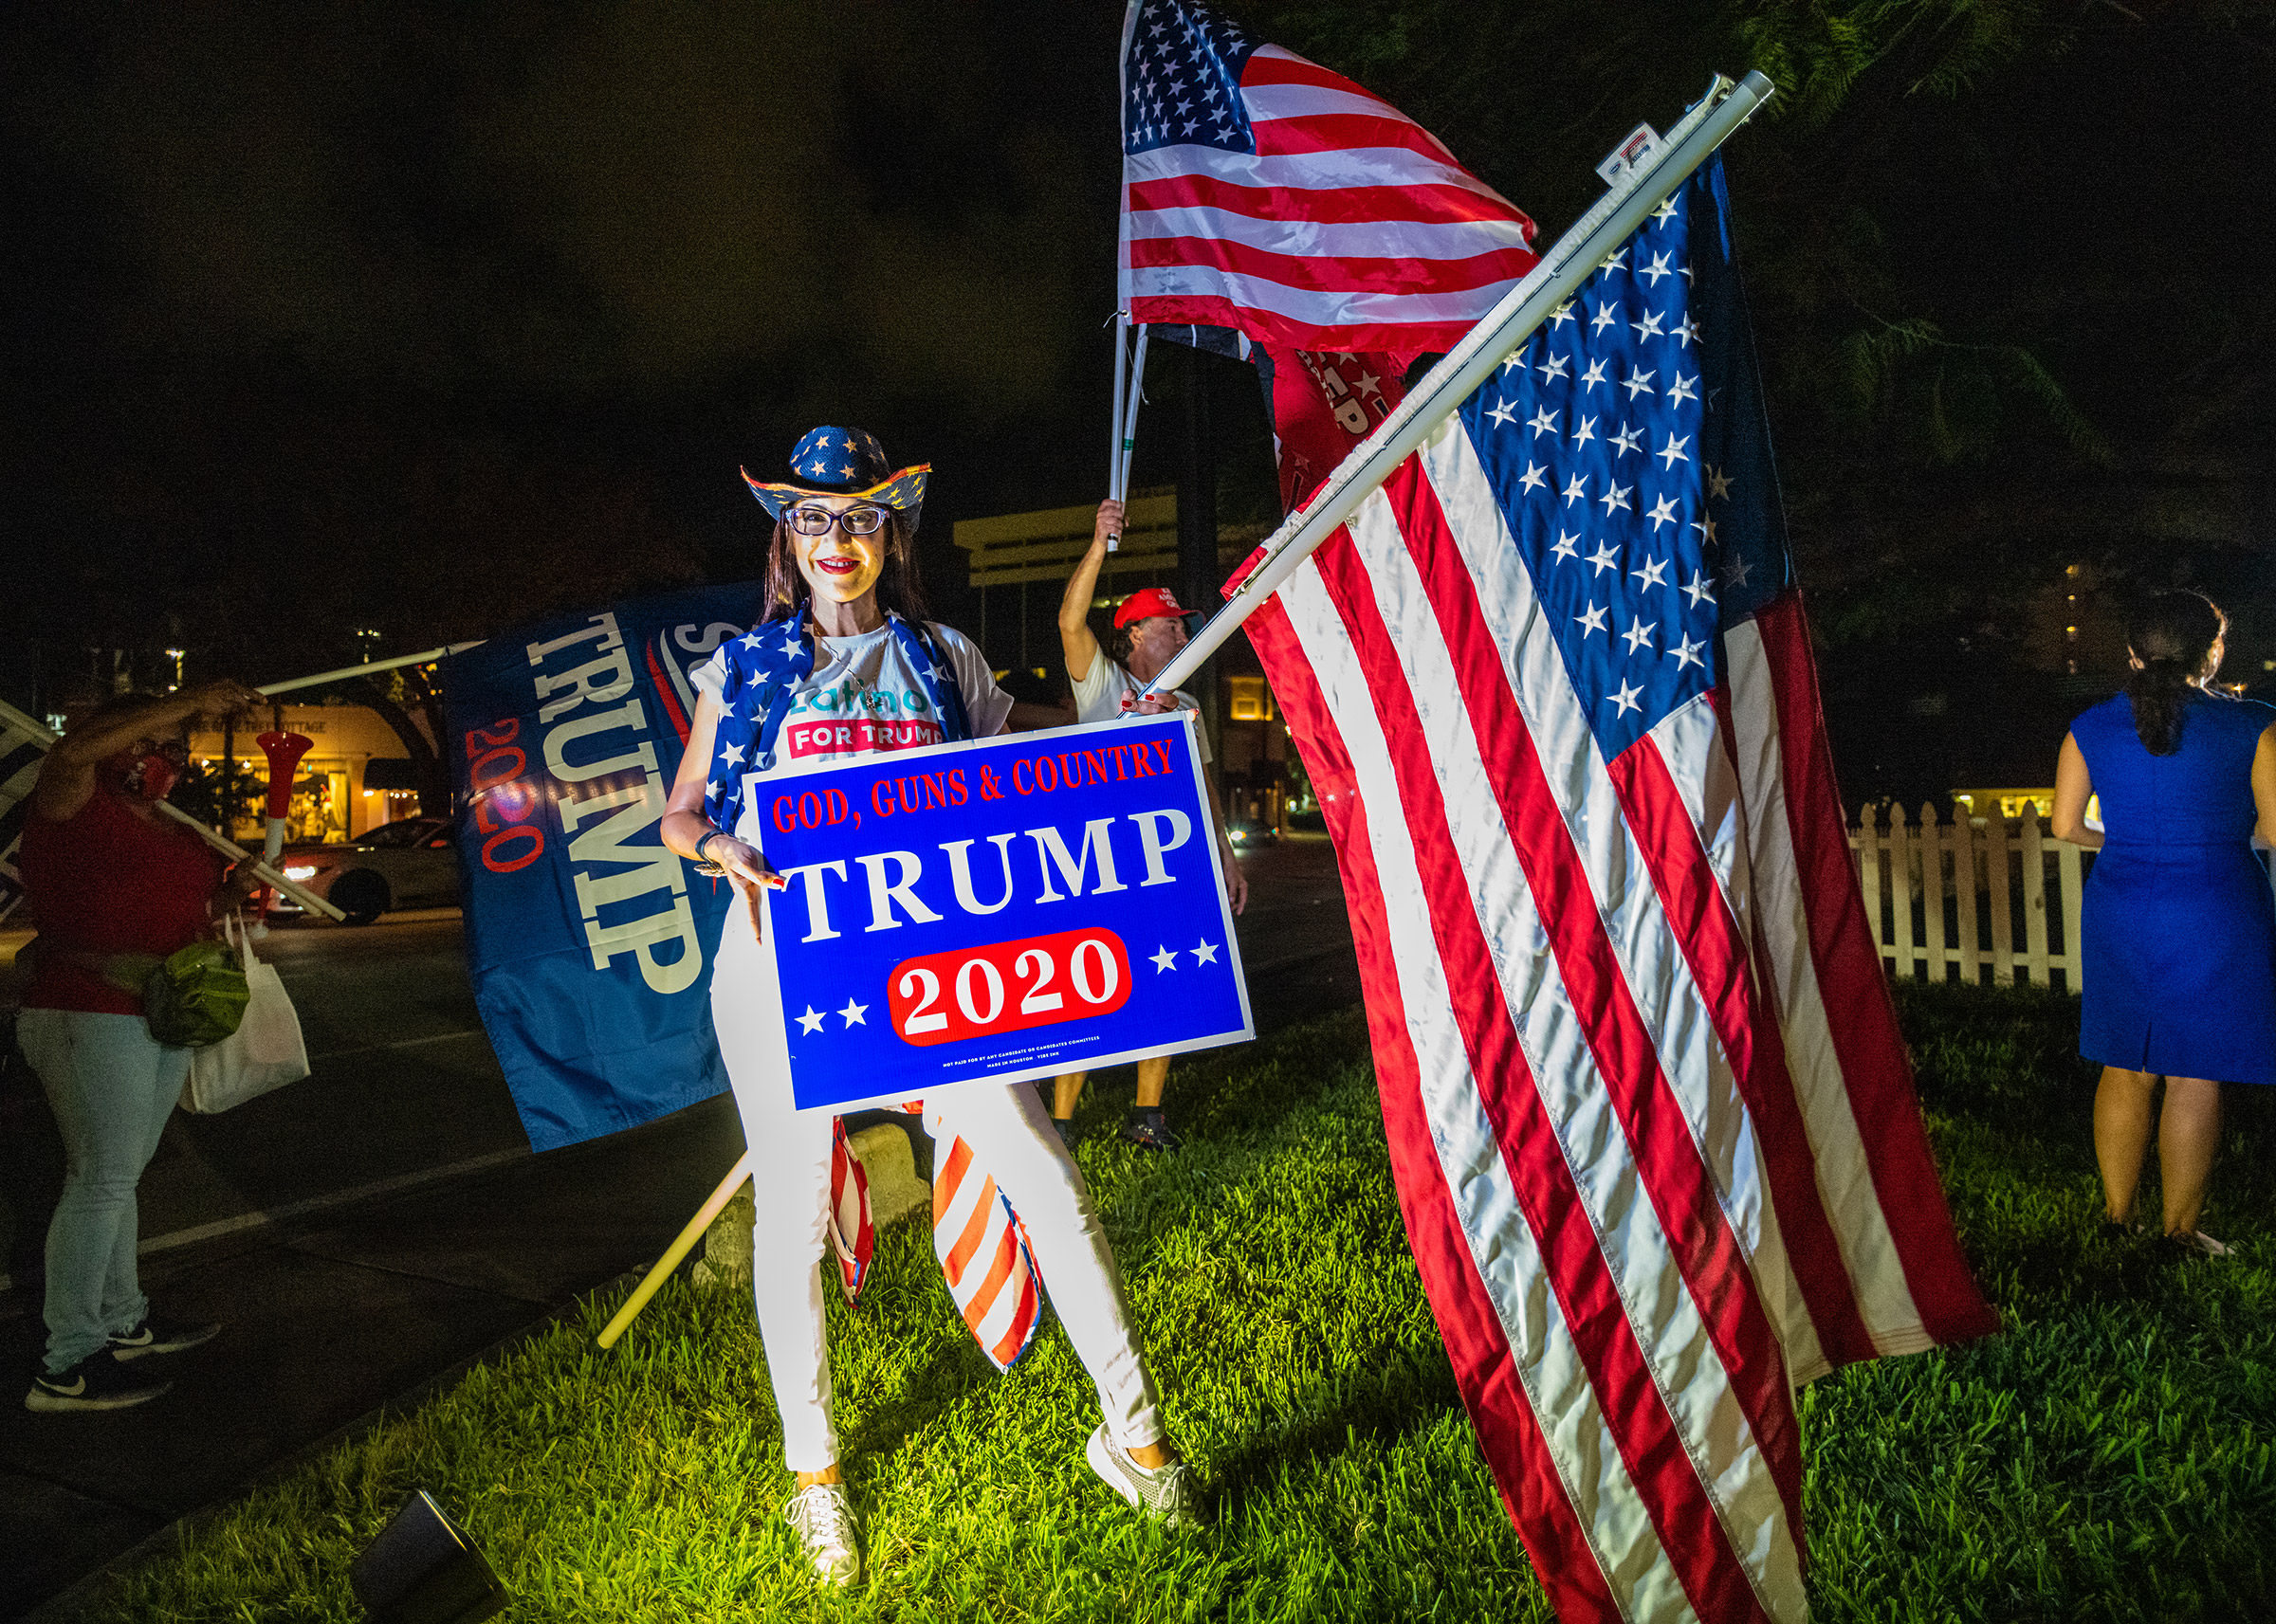 A supporter of President Trump poses for a photograph in Miami on Nov. 7. (Ruddy Roye for TIME)